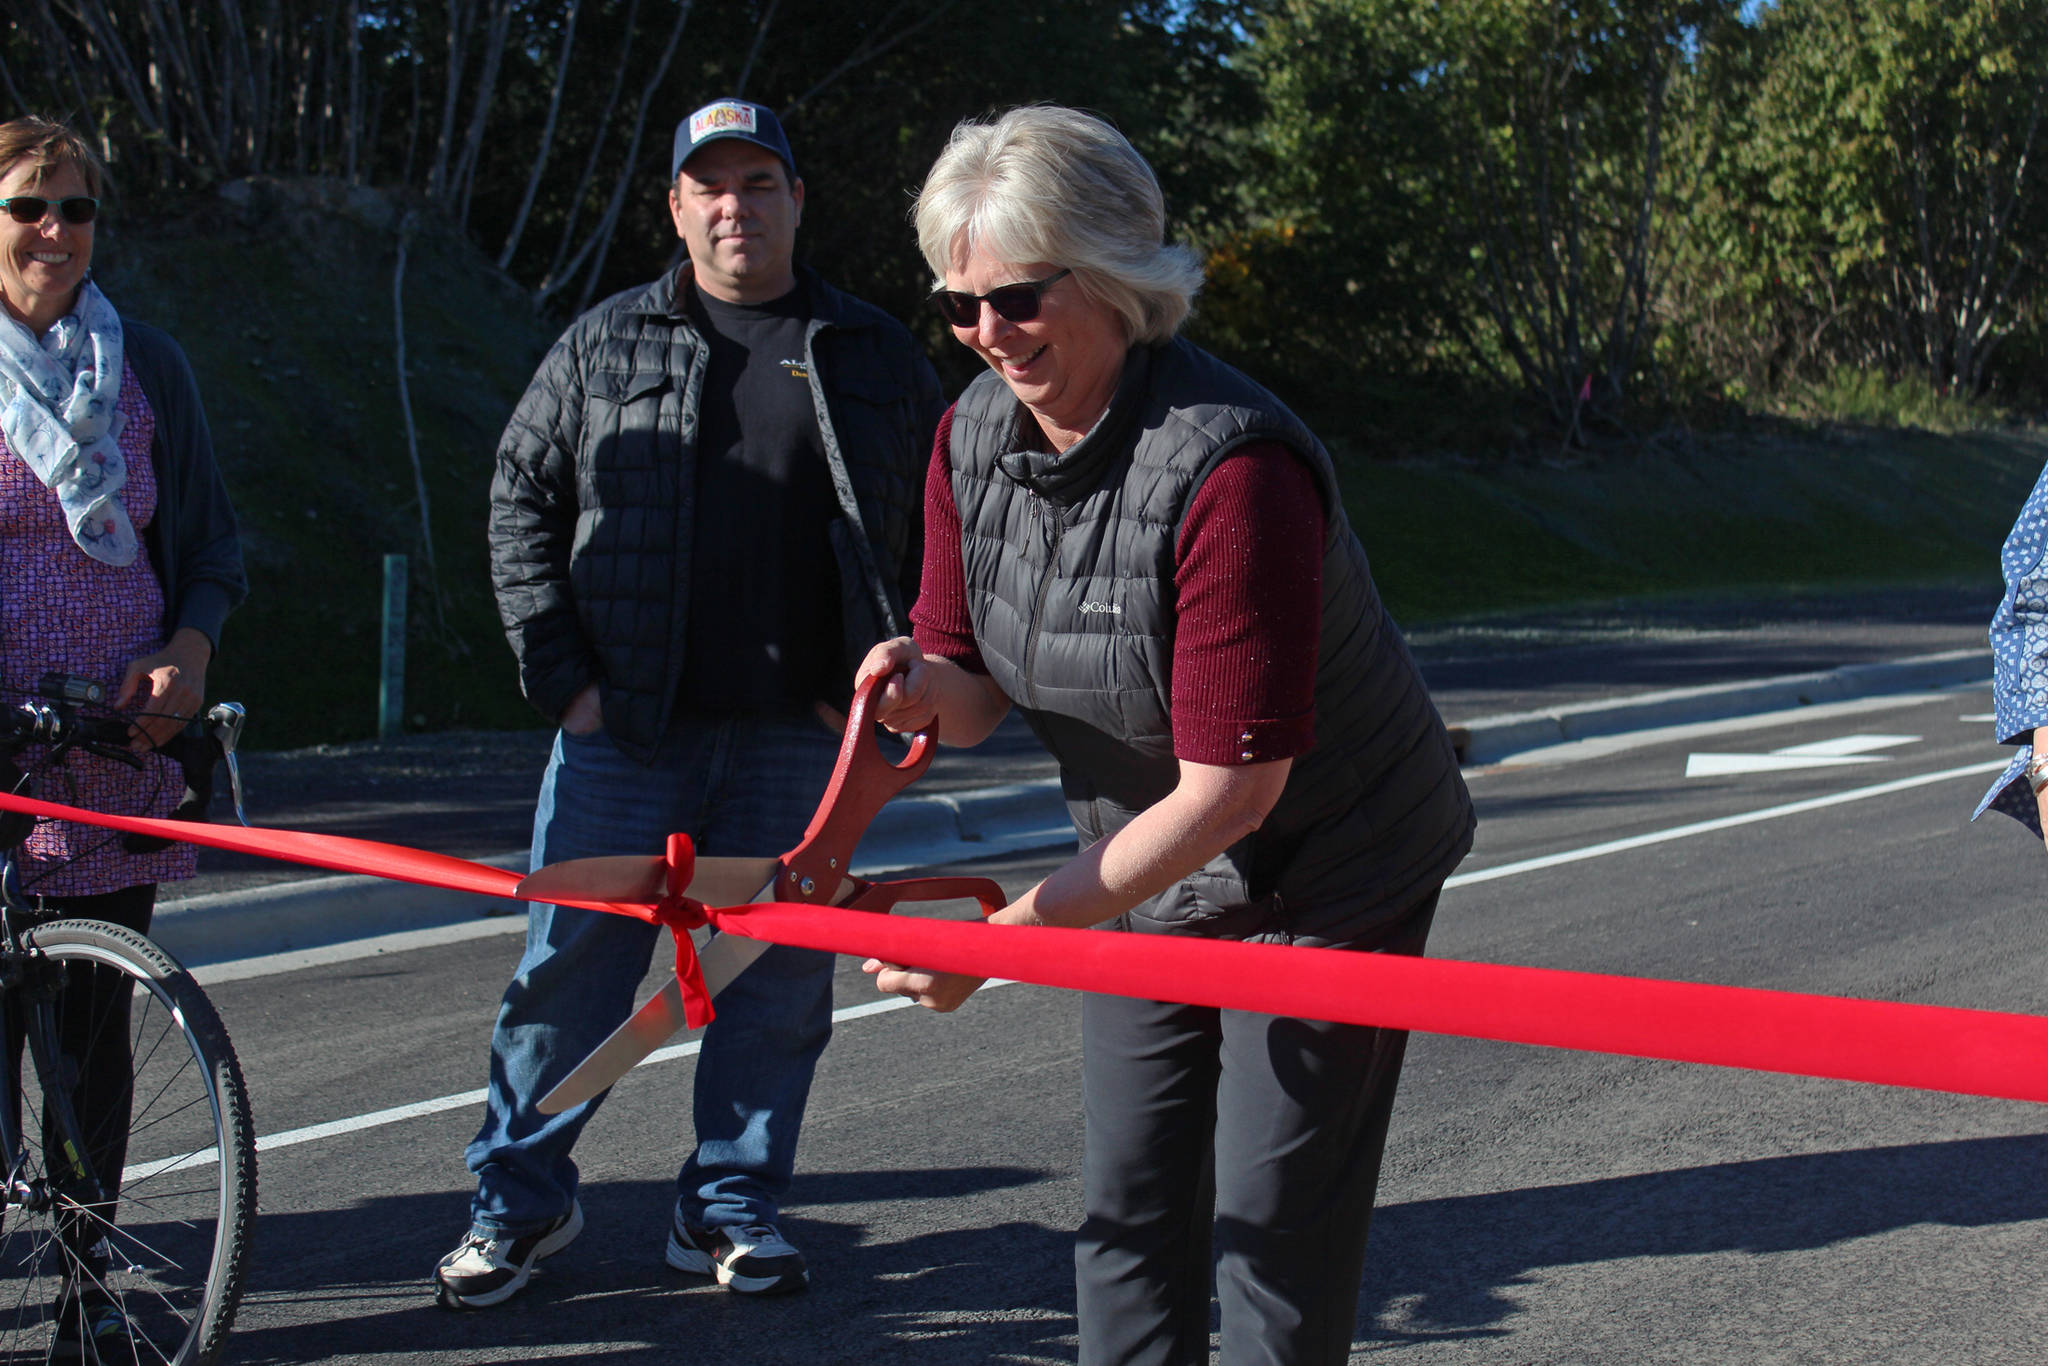 Homer City Council member Shelly Erickson cuts a celebratory ribbon at the grand opening for the Greatland Street expansion Tuesday, Sept. 25, 2018 in Homer, Alaska. Erickson played a large role in getting the project off the ground. (Photo by Megan Pacer/Homer News)